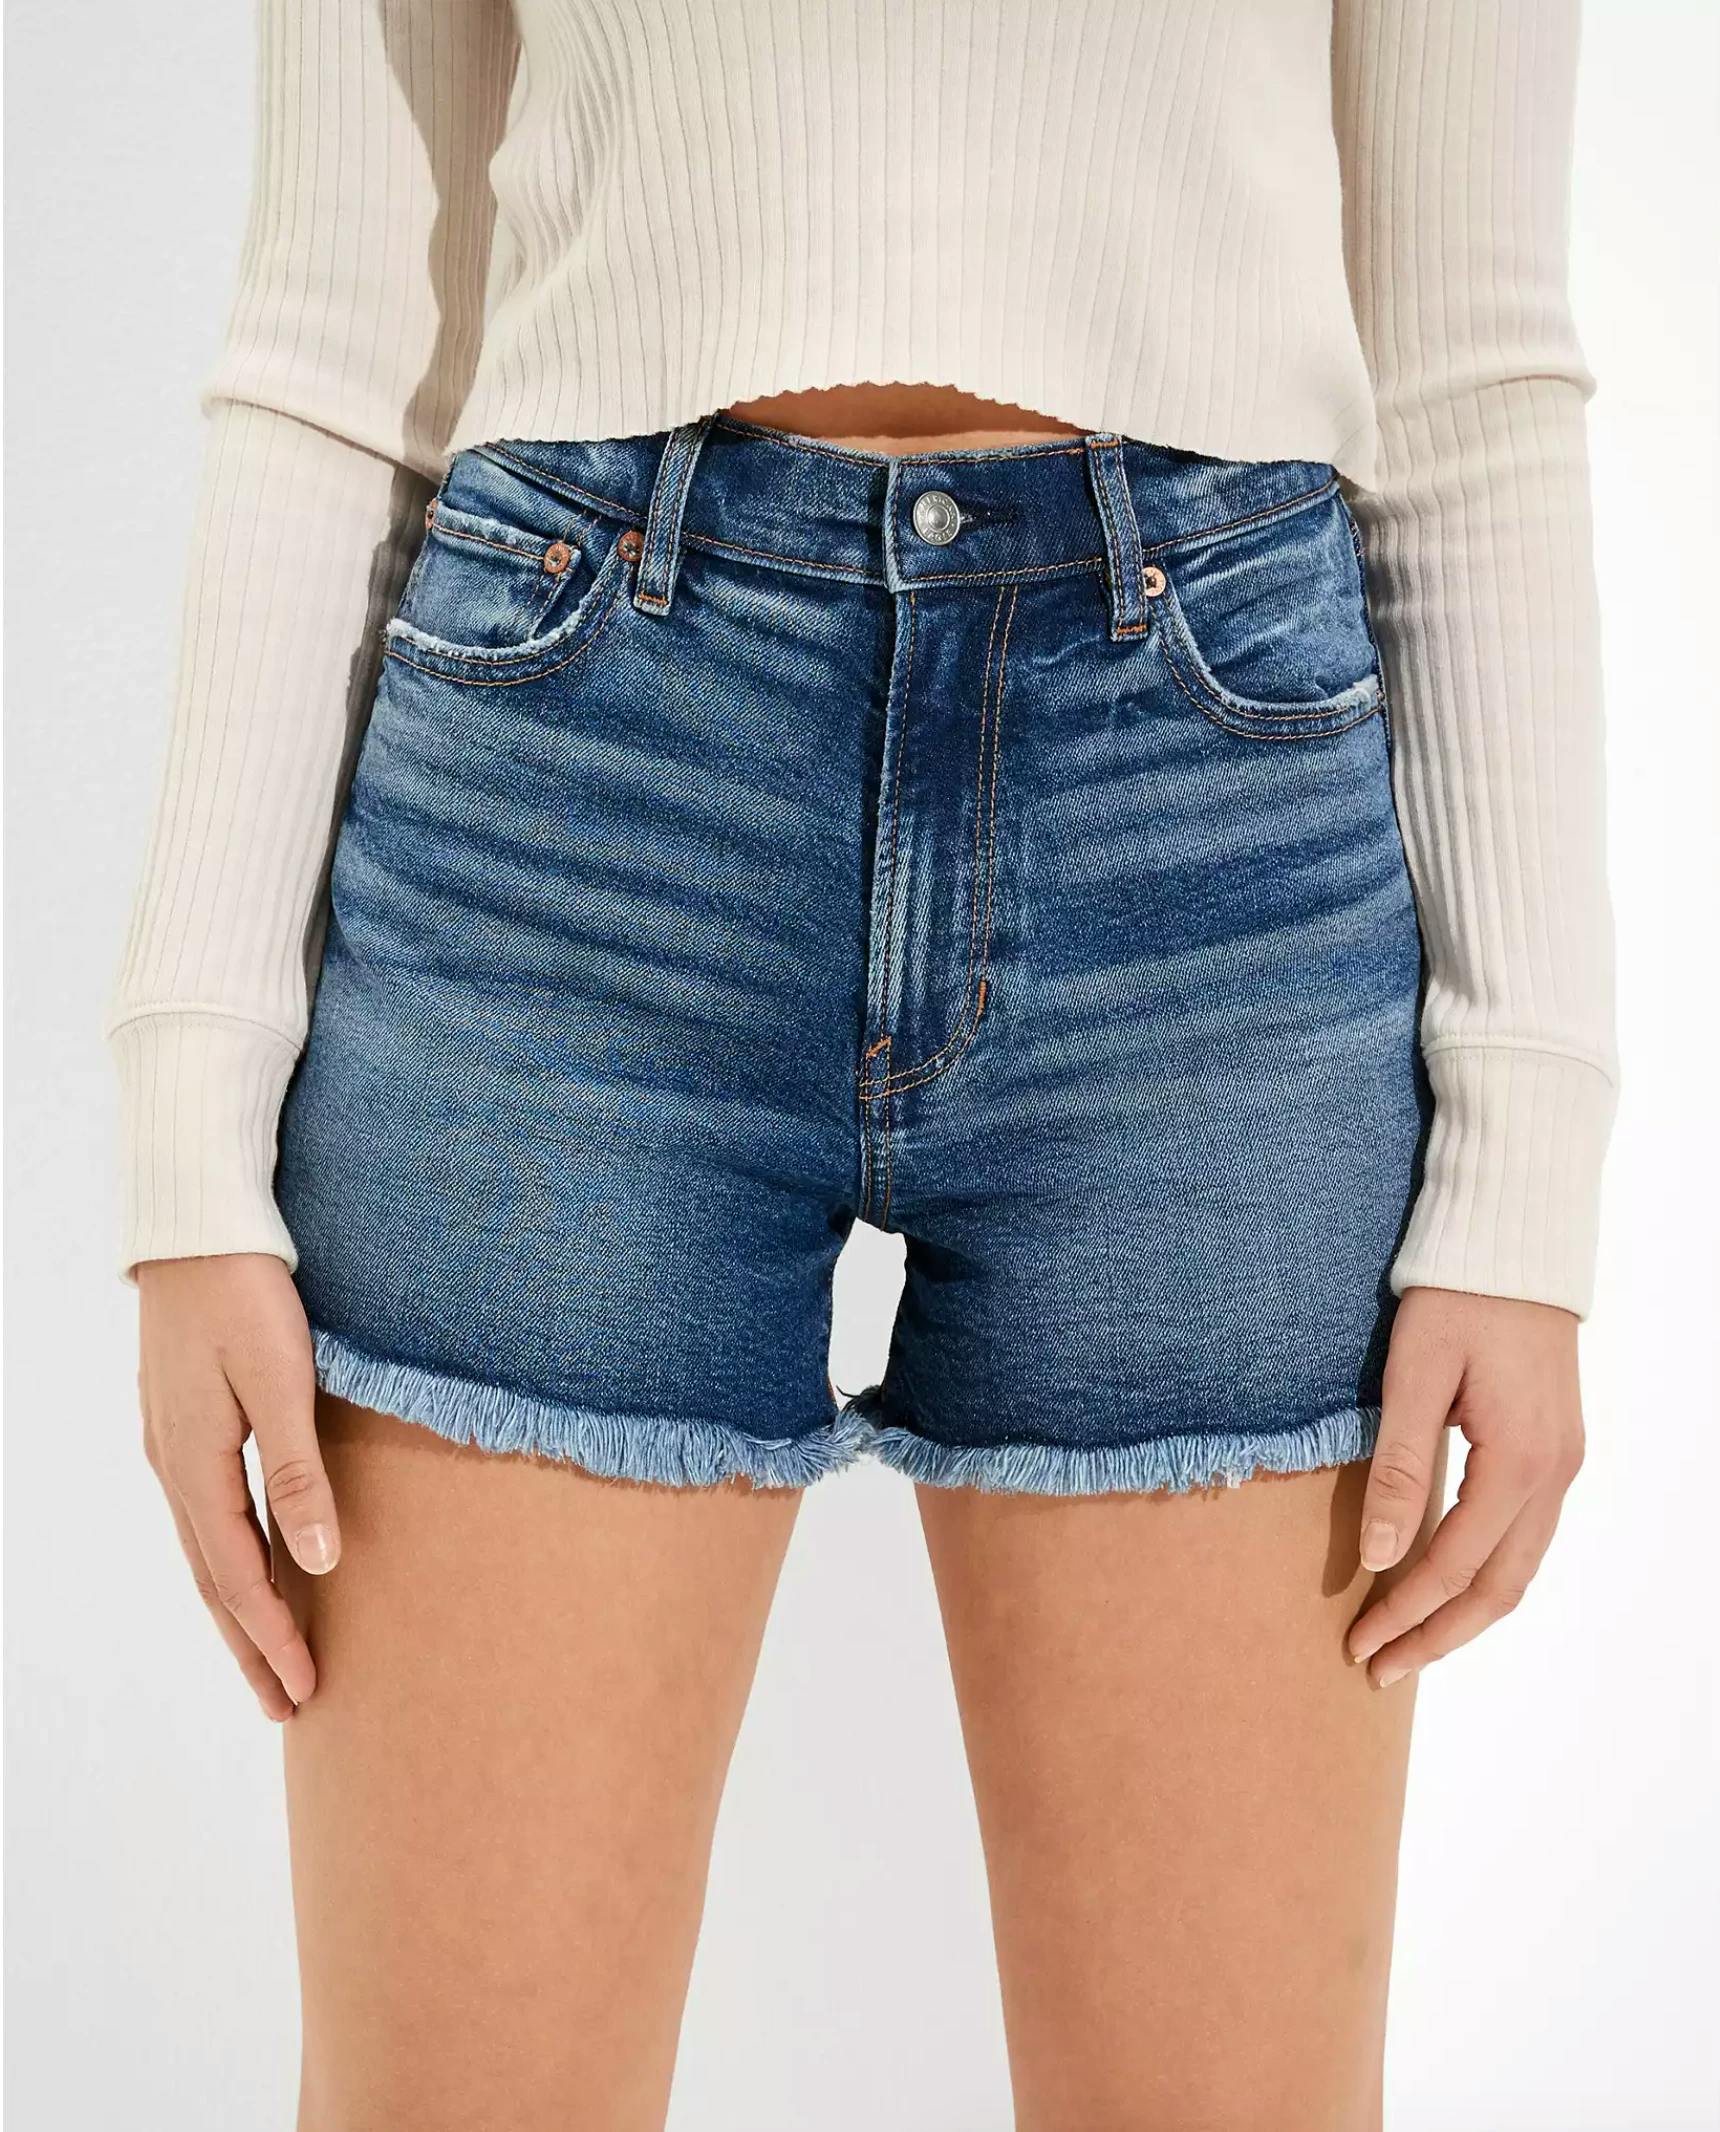 Most Flattering Shorts for Pear Shaped Bodies - Lipgloss and Crayons